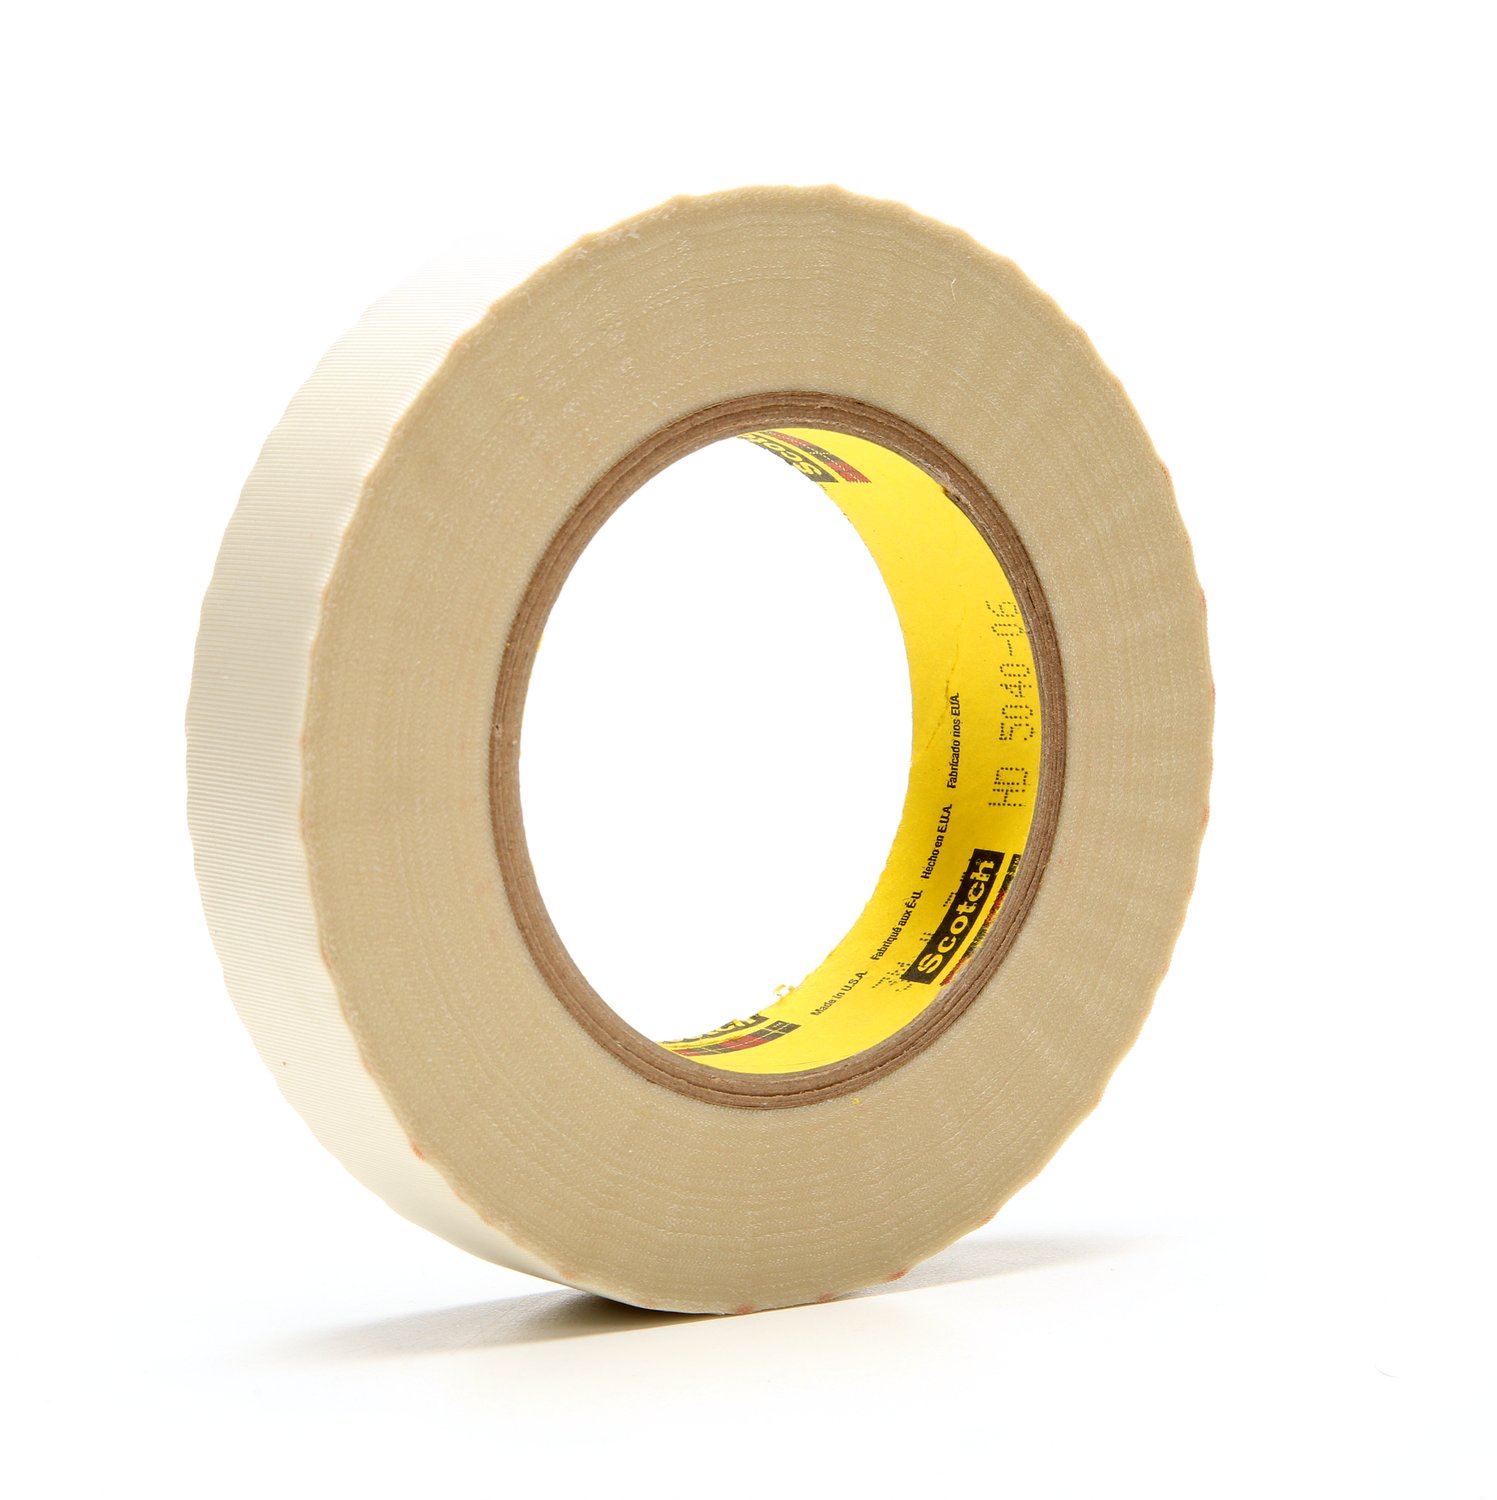 1roll Metallic Adhesive Tape, Simple Golden Office Tape For Office, School